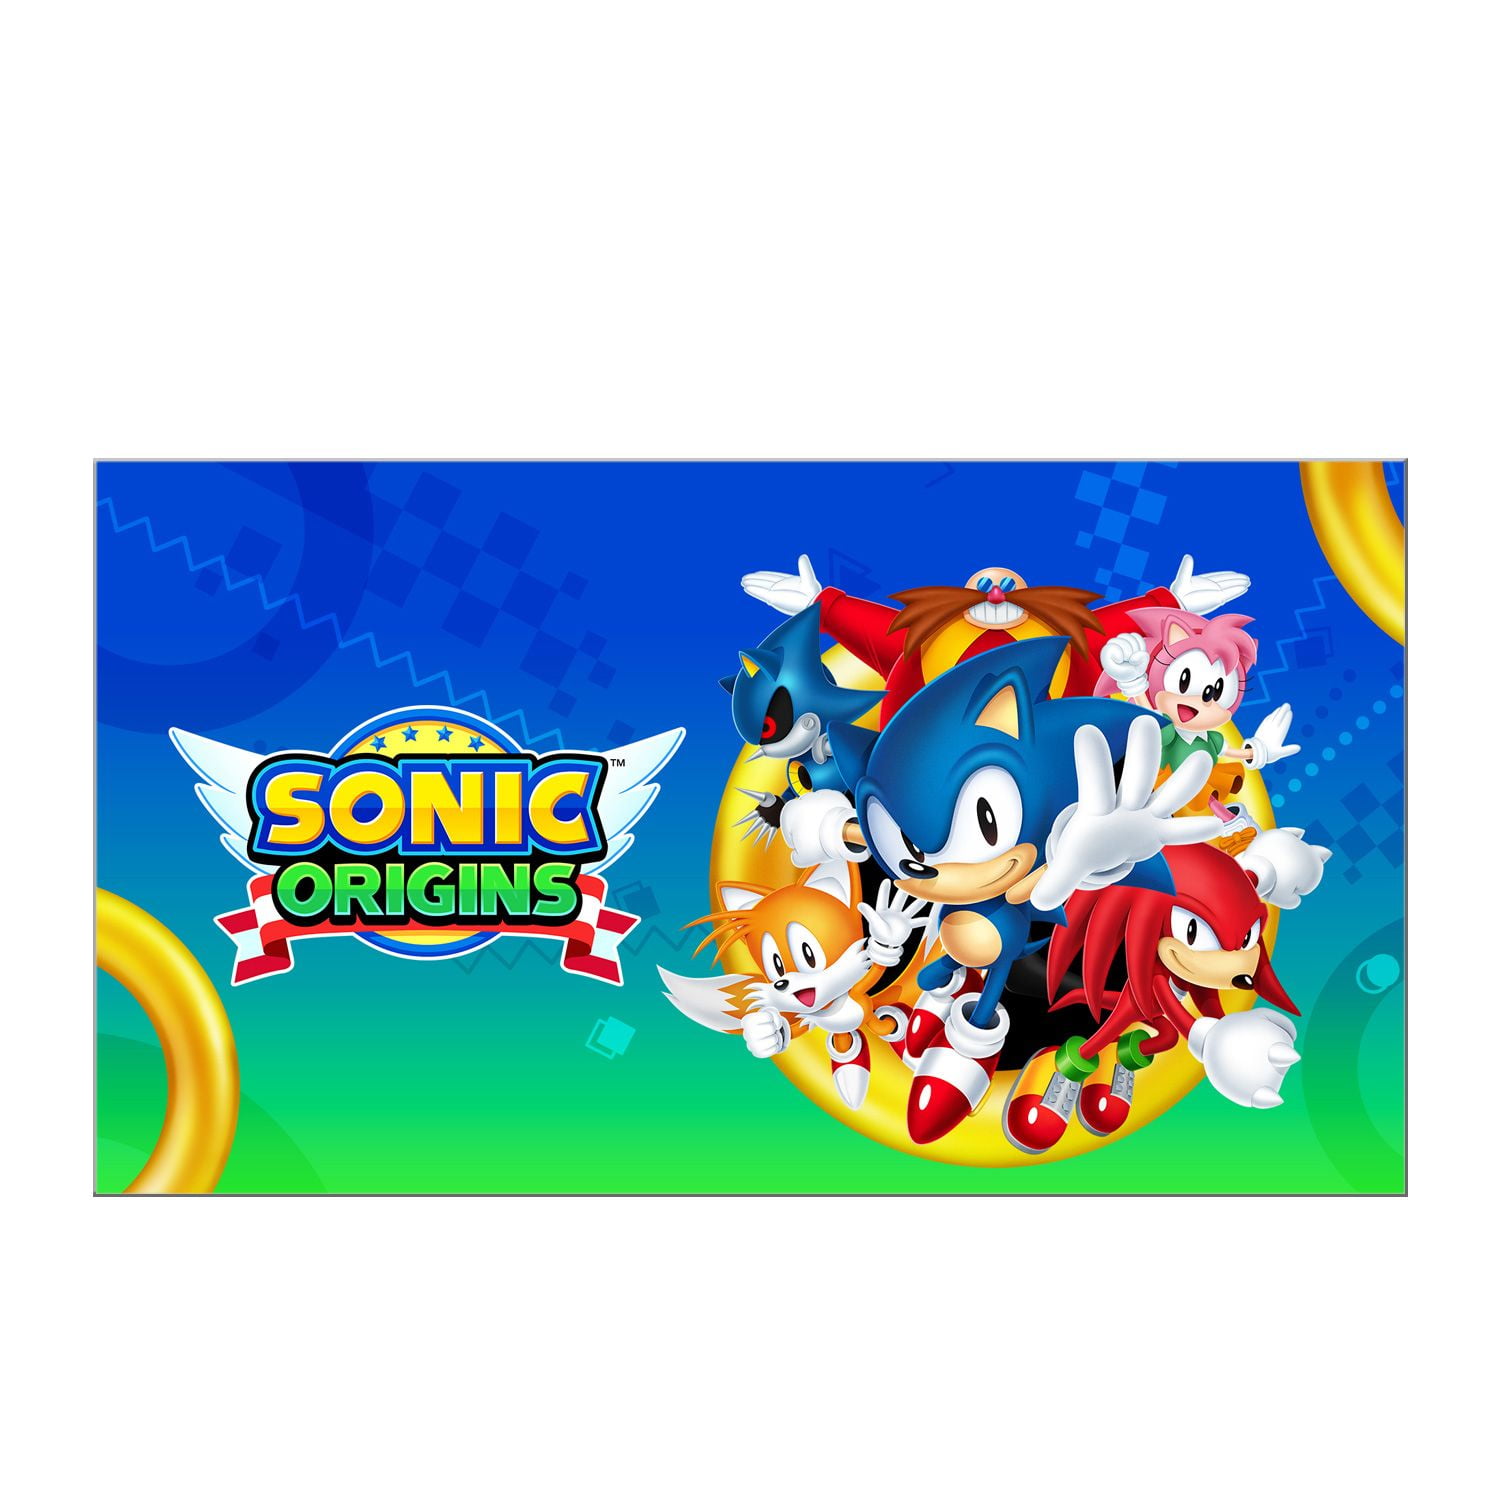 No plans for a physical release for Sonic Origins, but SEGA is